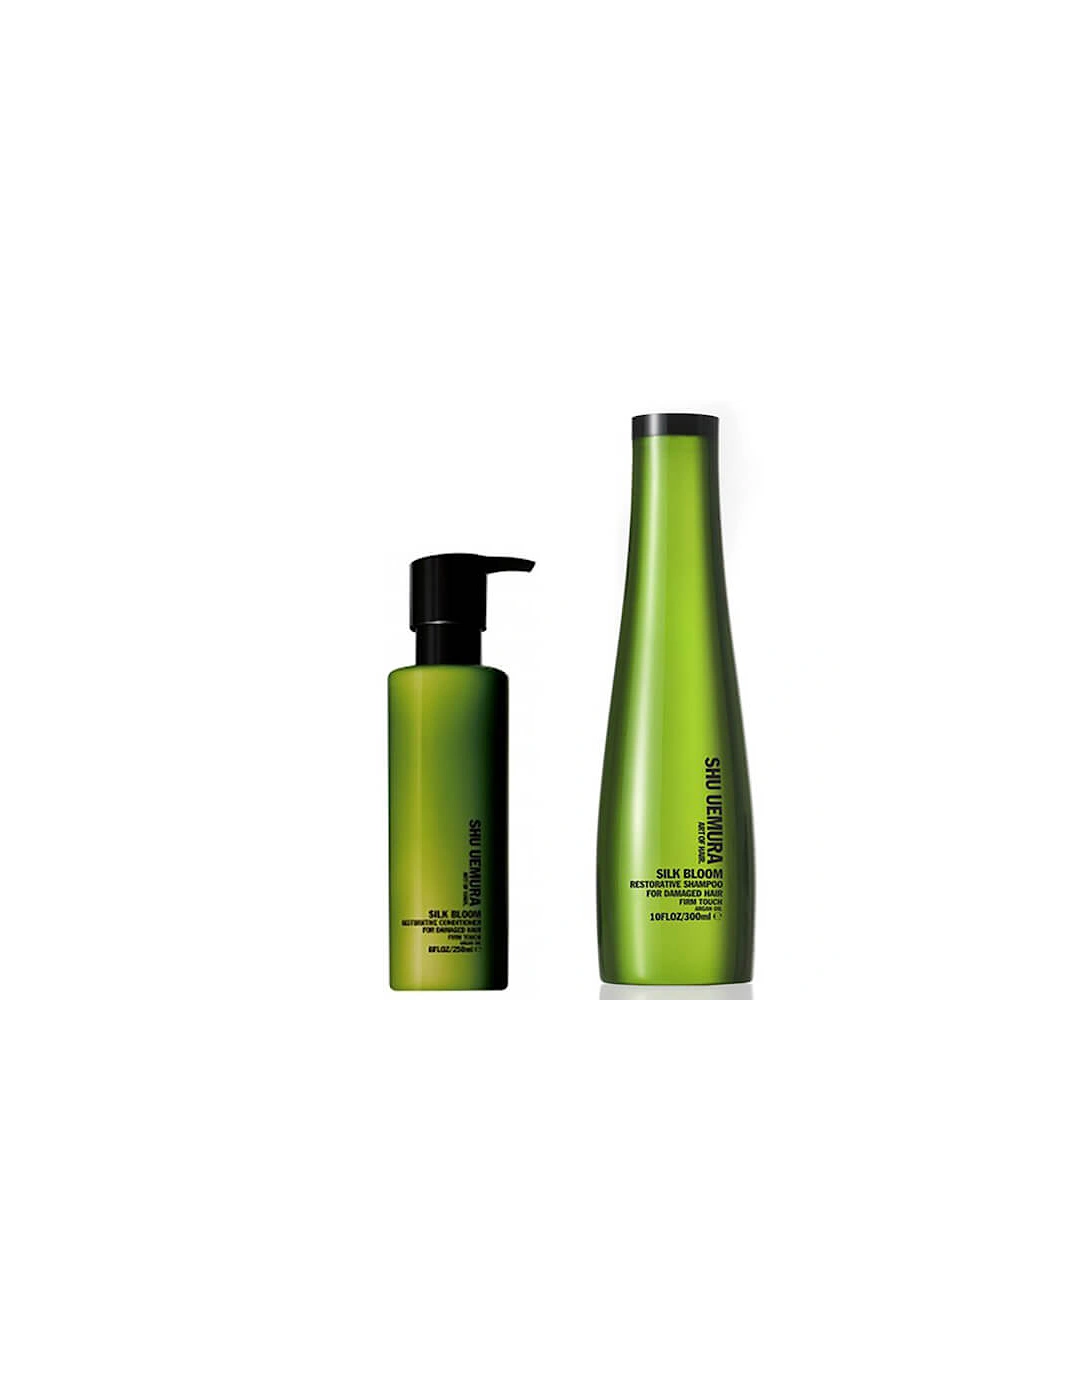 Art of Hair Silk Bloom Shampoo (300ml) and Conditioner (250ml) - Art of Hair, 2 of 1